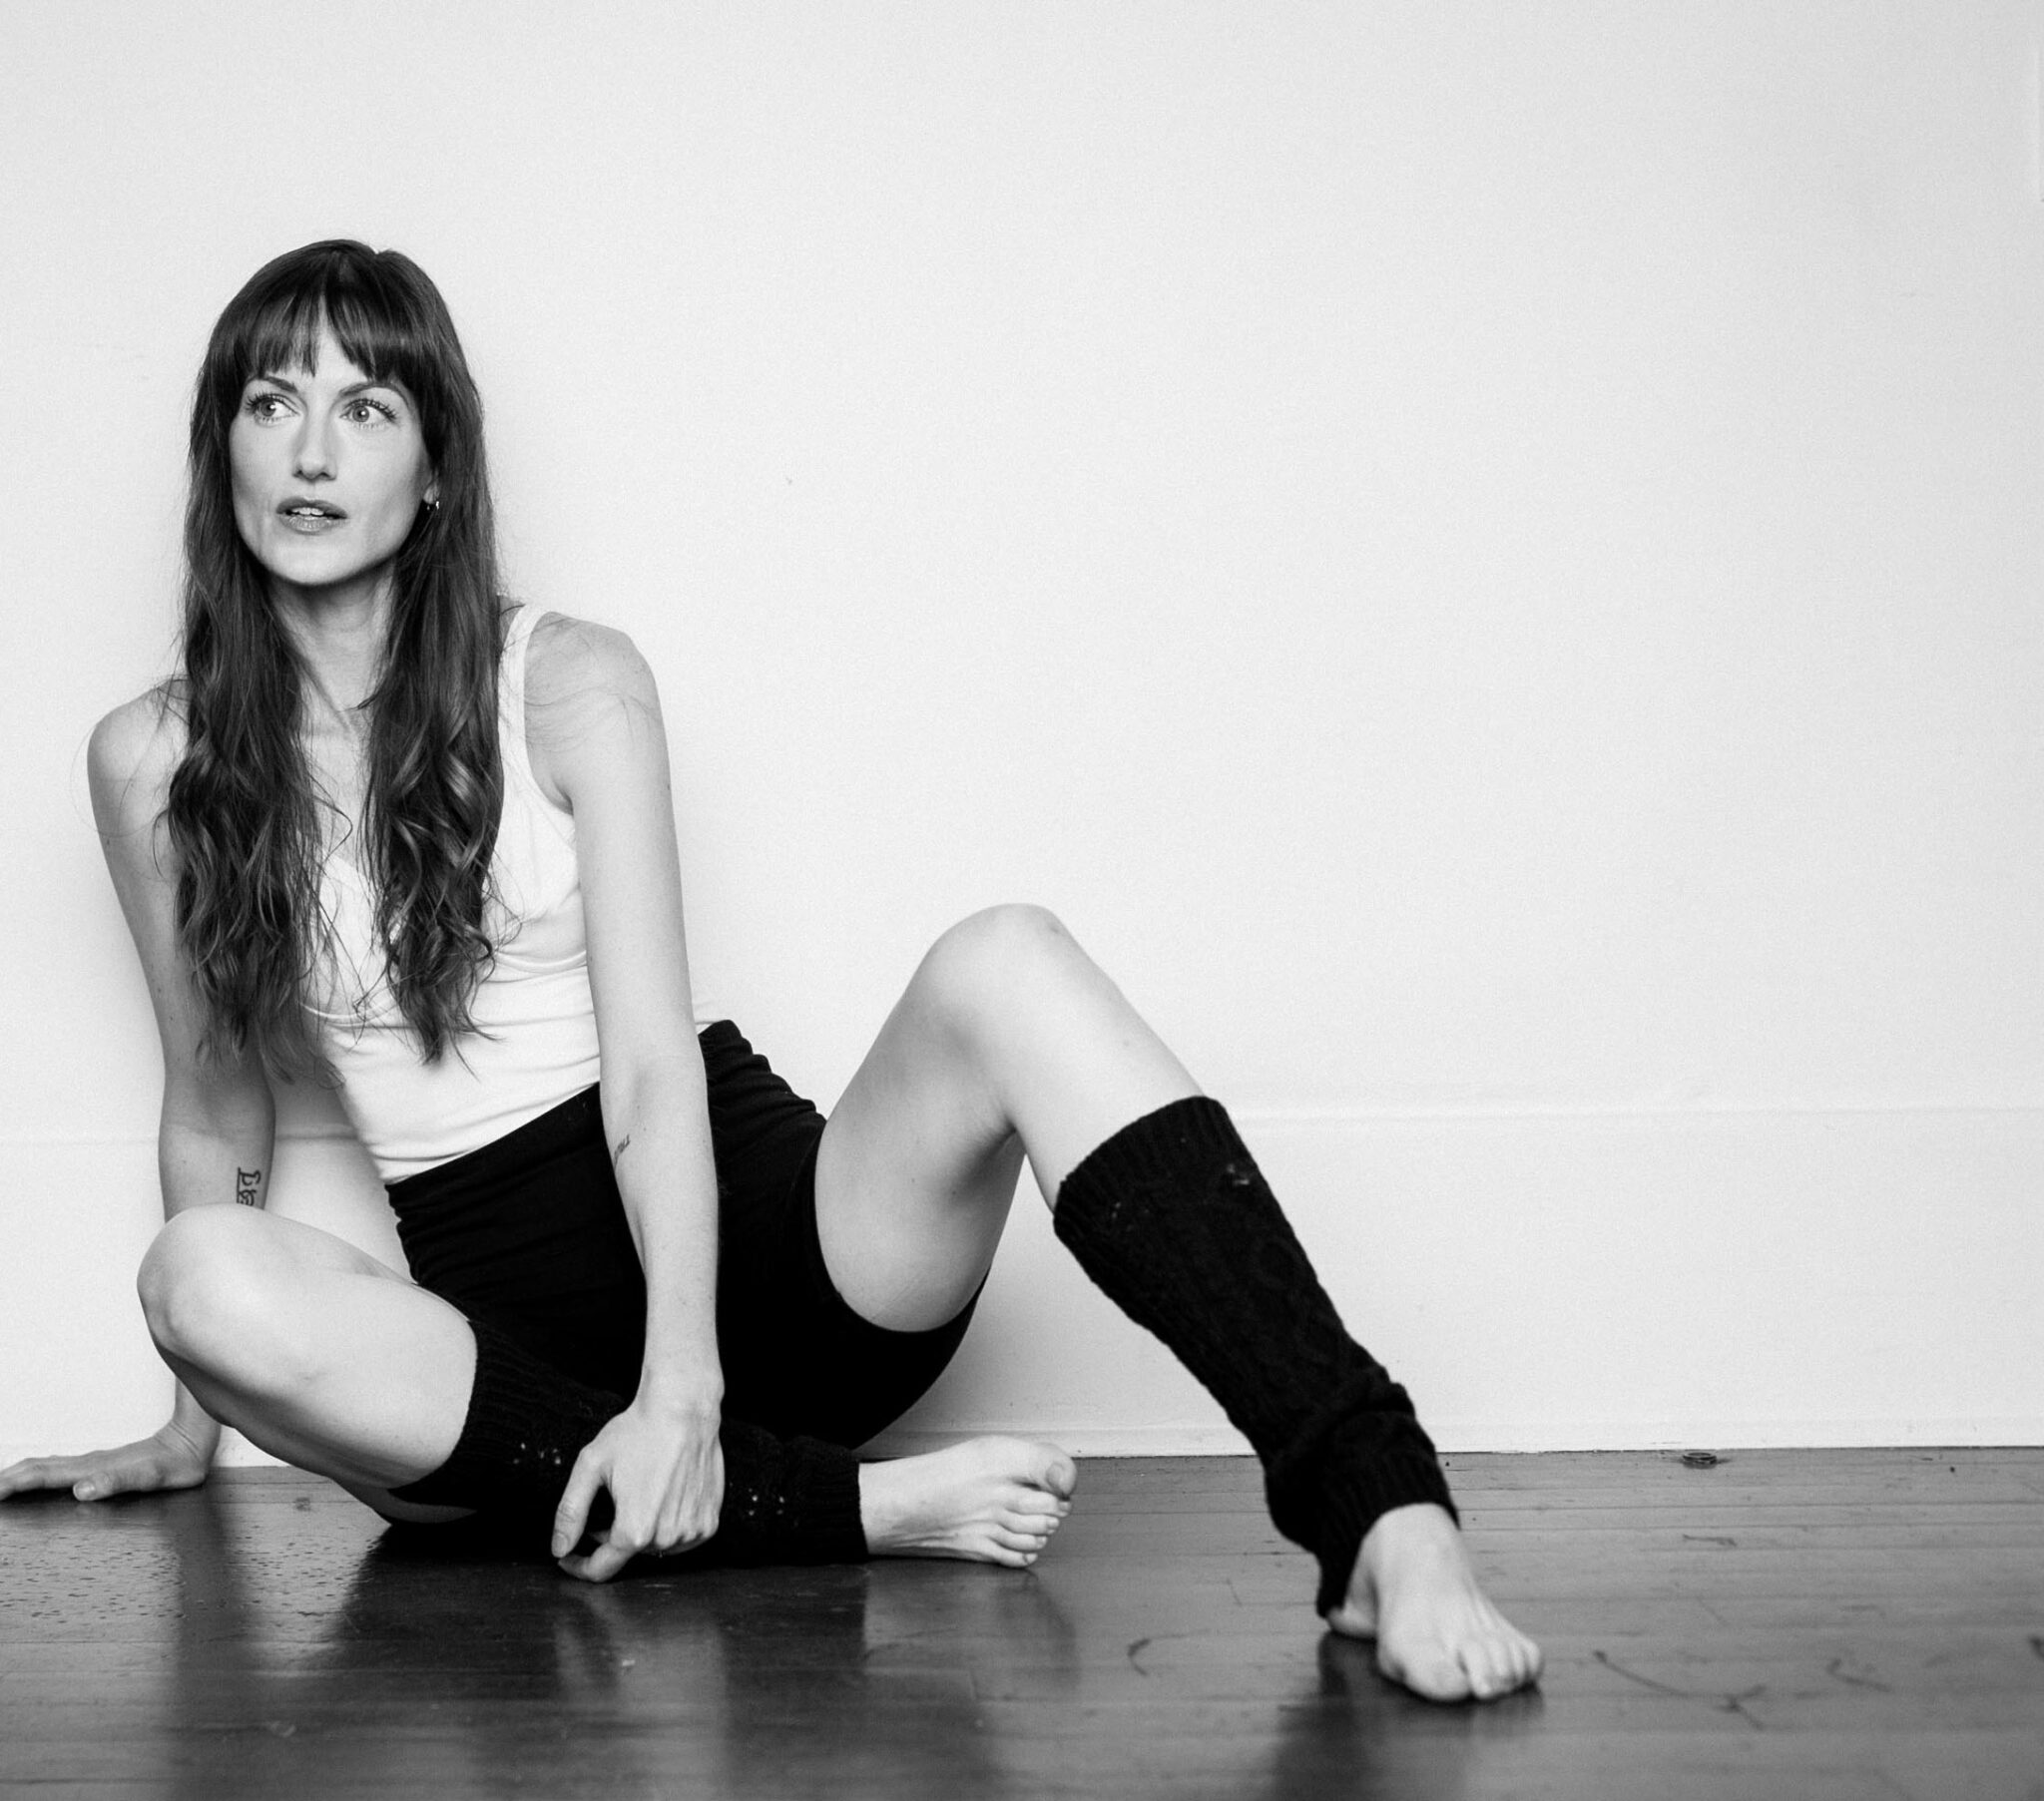 A full body image of Brianne Hogan sitting on the floor with one leg outstretched